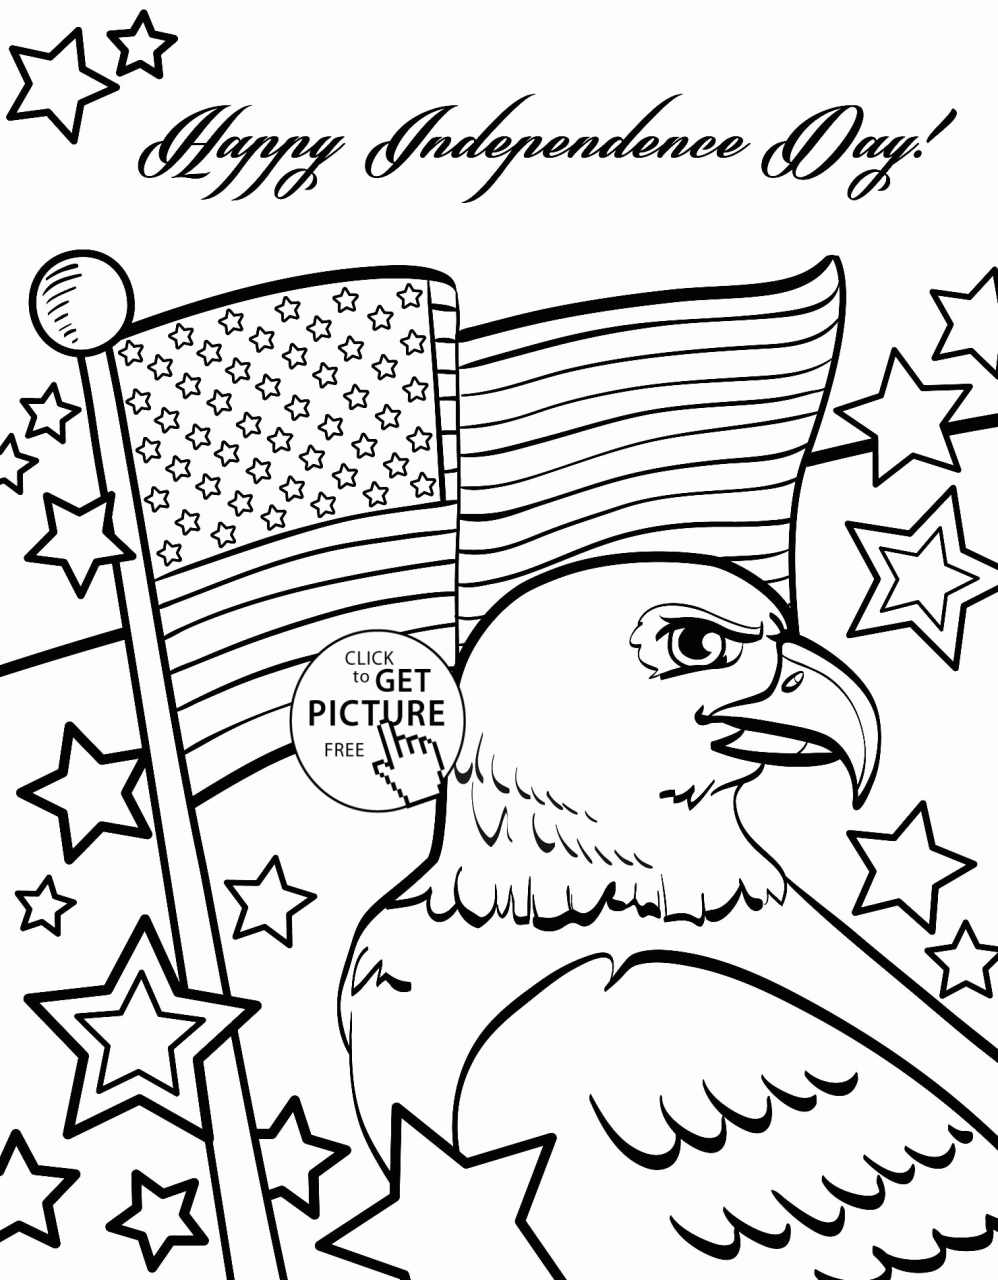 Independence Day of 4th of July coloring page for kids, coloring pages